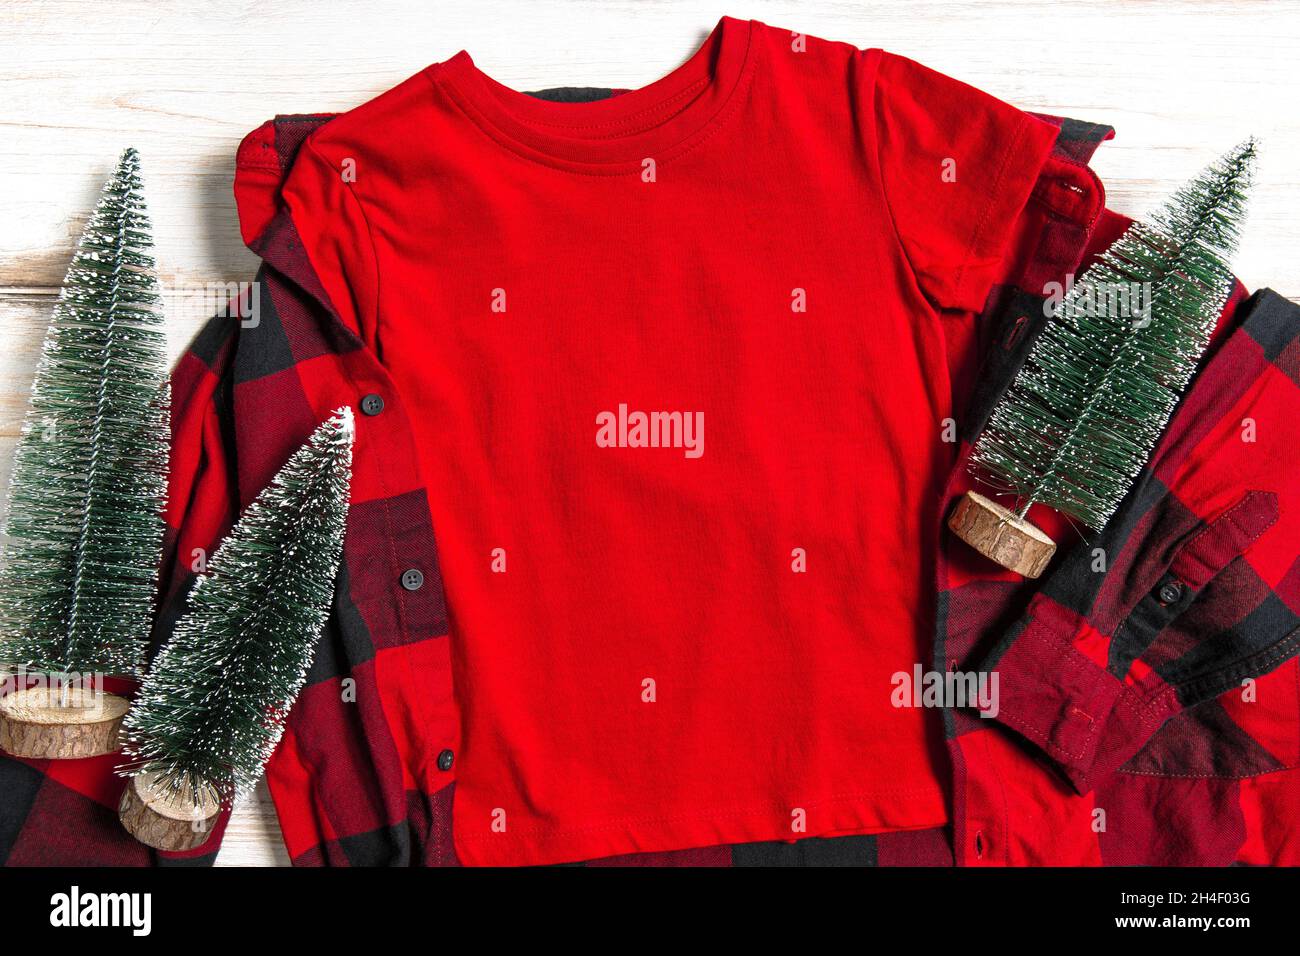 Red t-shirt mockup with Christmas tree decoration Stock Photo